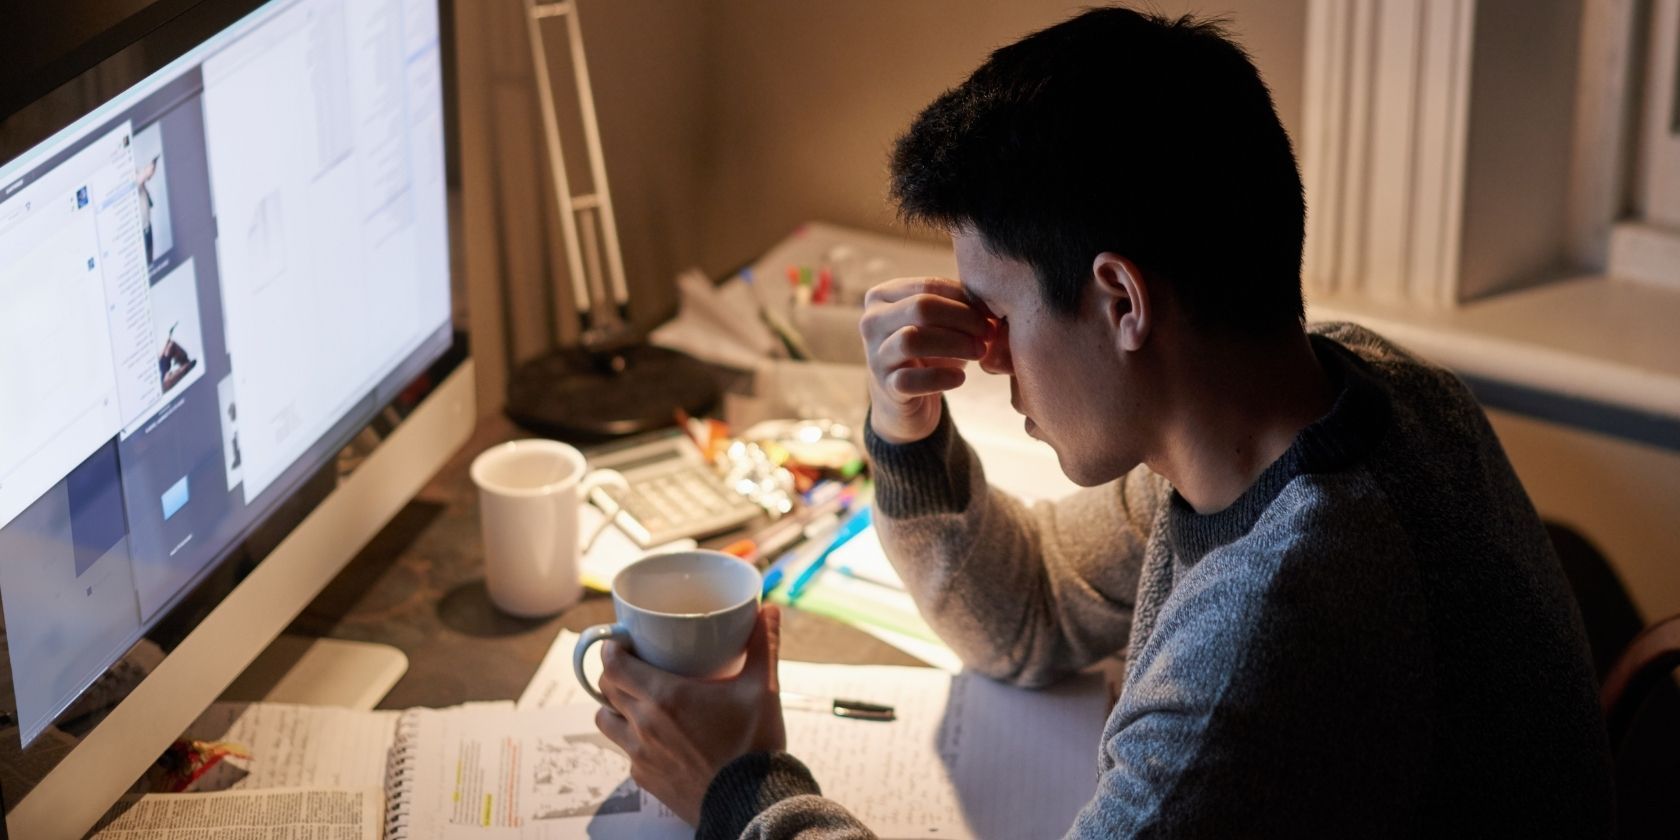 Student completing work at desk looking stressed